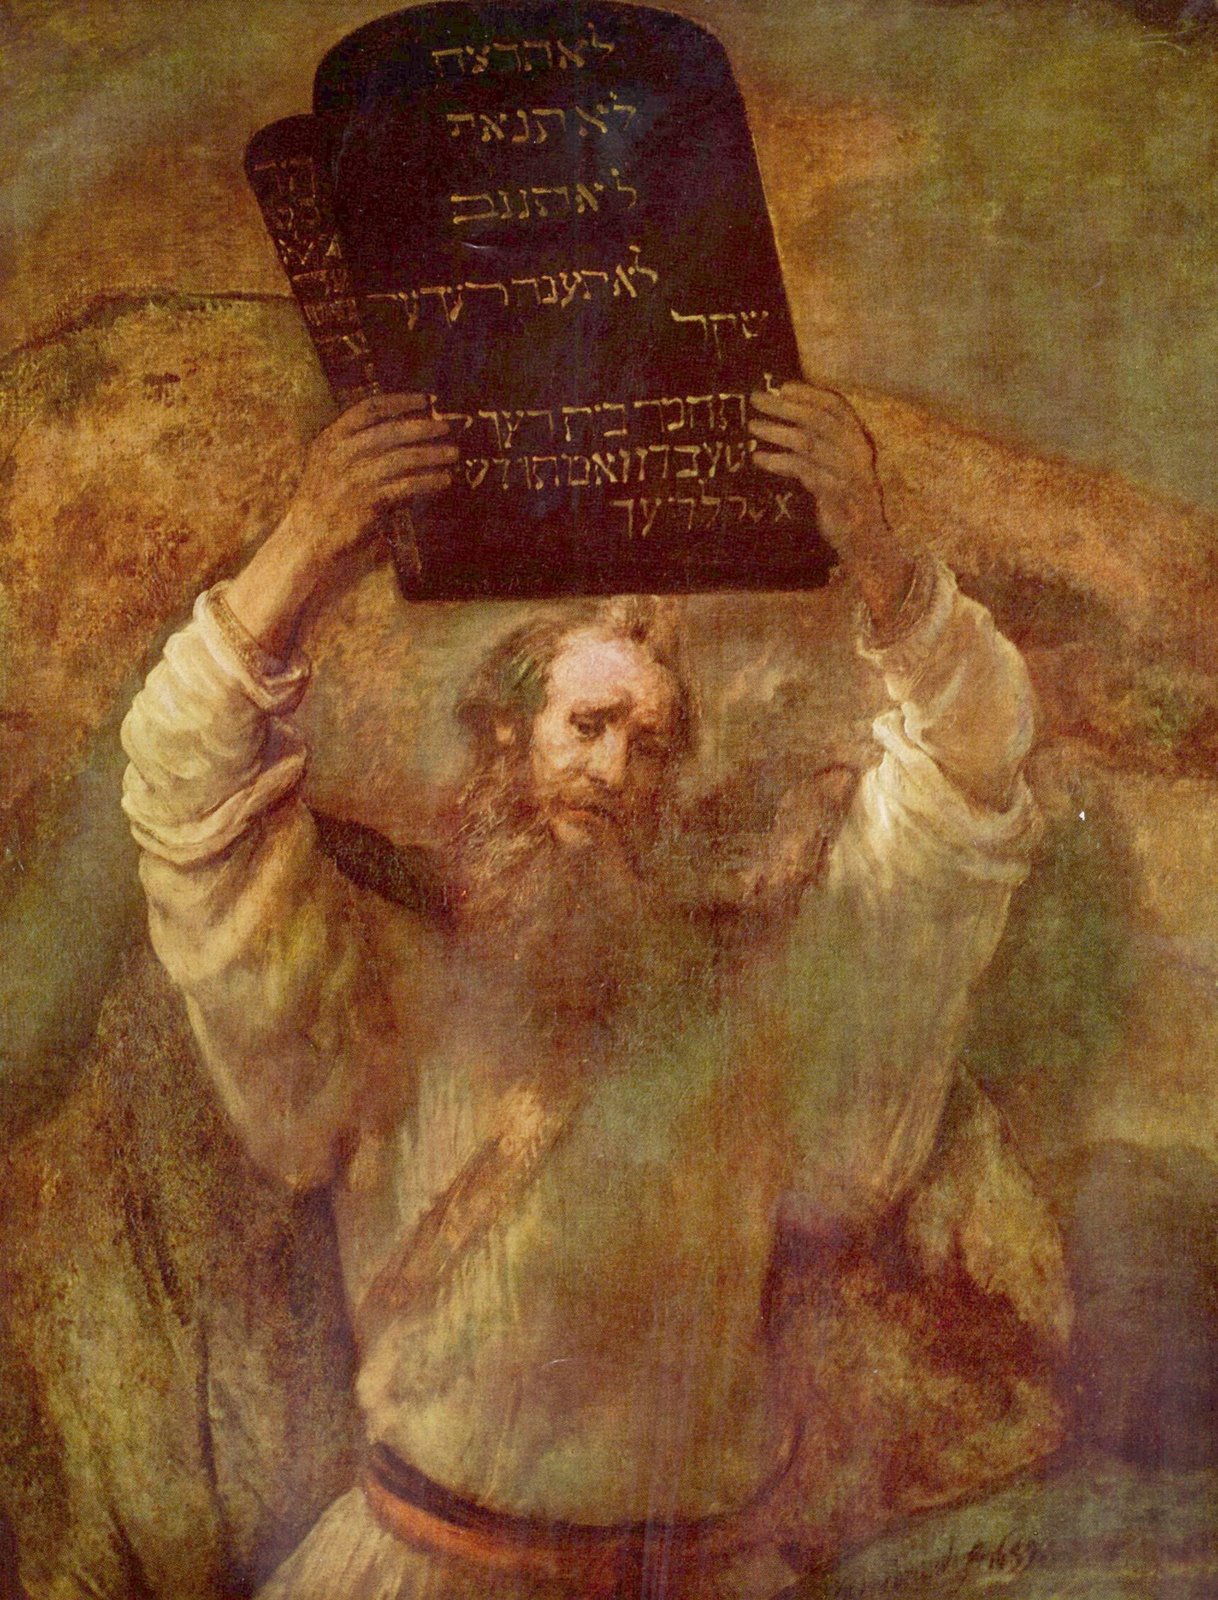 [Moses+and+the+tablets.jpg]